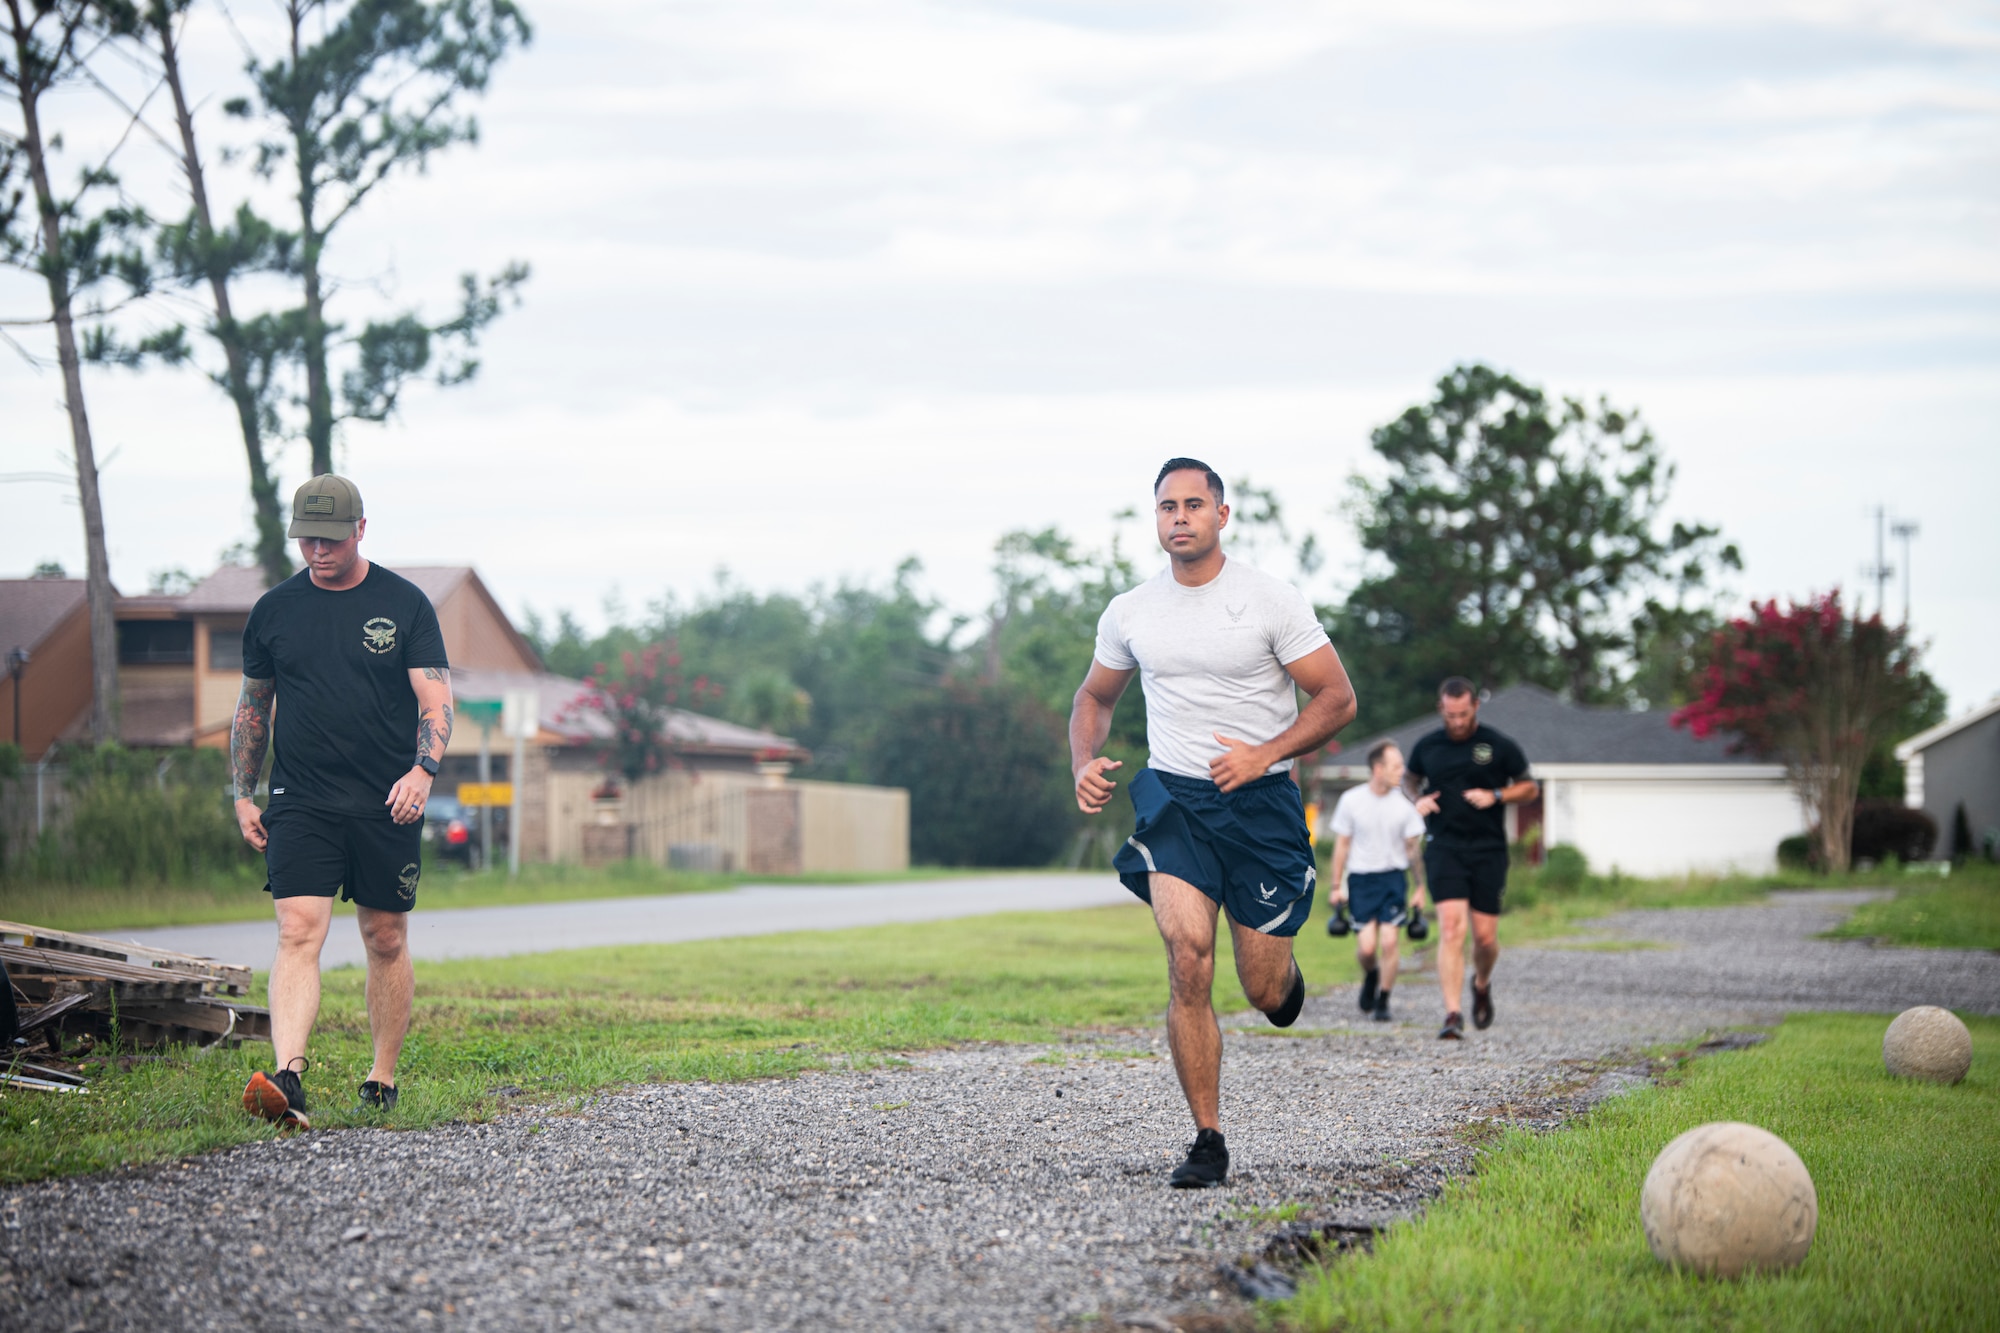 U.S. Air Force Tech. Sgt. Gabriell Vieira, 325th Security Forces Squadron tactical response team noncommissioned officer in charge, center, runs around a track at the Bay County Sheriff’s Office, Panama City, Florida, July 13, 2021. The 325th SFS is determining the effectiveness of standing up a specialized team that trains with local police departments to handle high-threat situations, such as barricaded suspects, hostage situations and mass shootings. (U.S. Air Force photo by Staff Sgt. Stefan Alvarez)